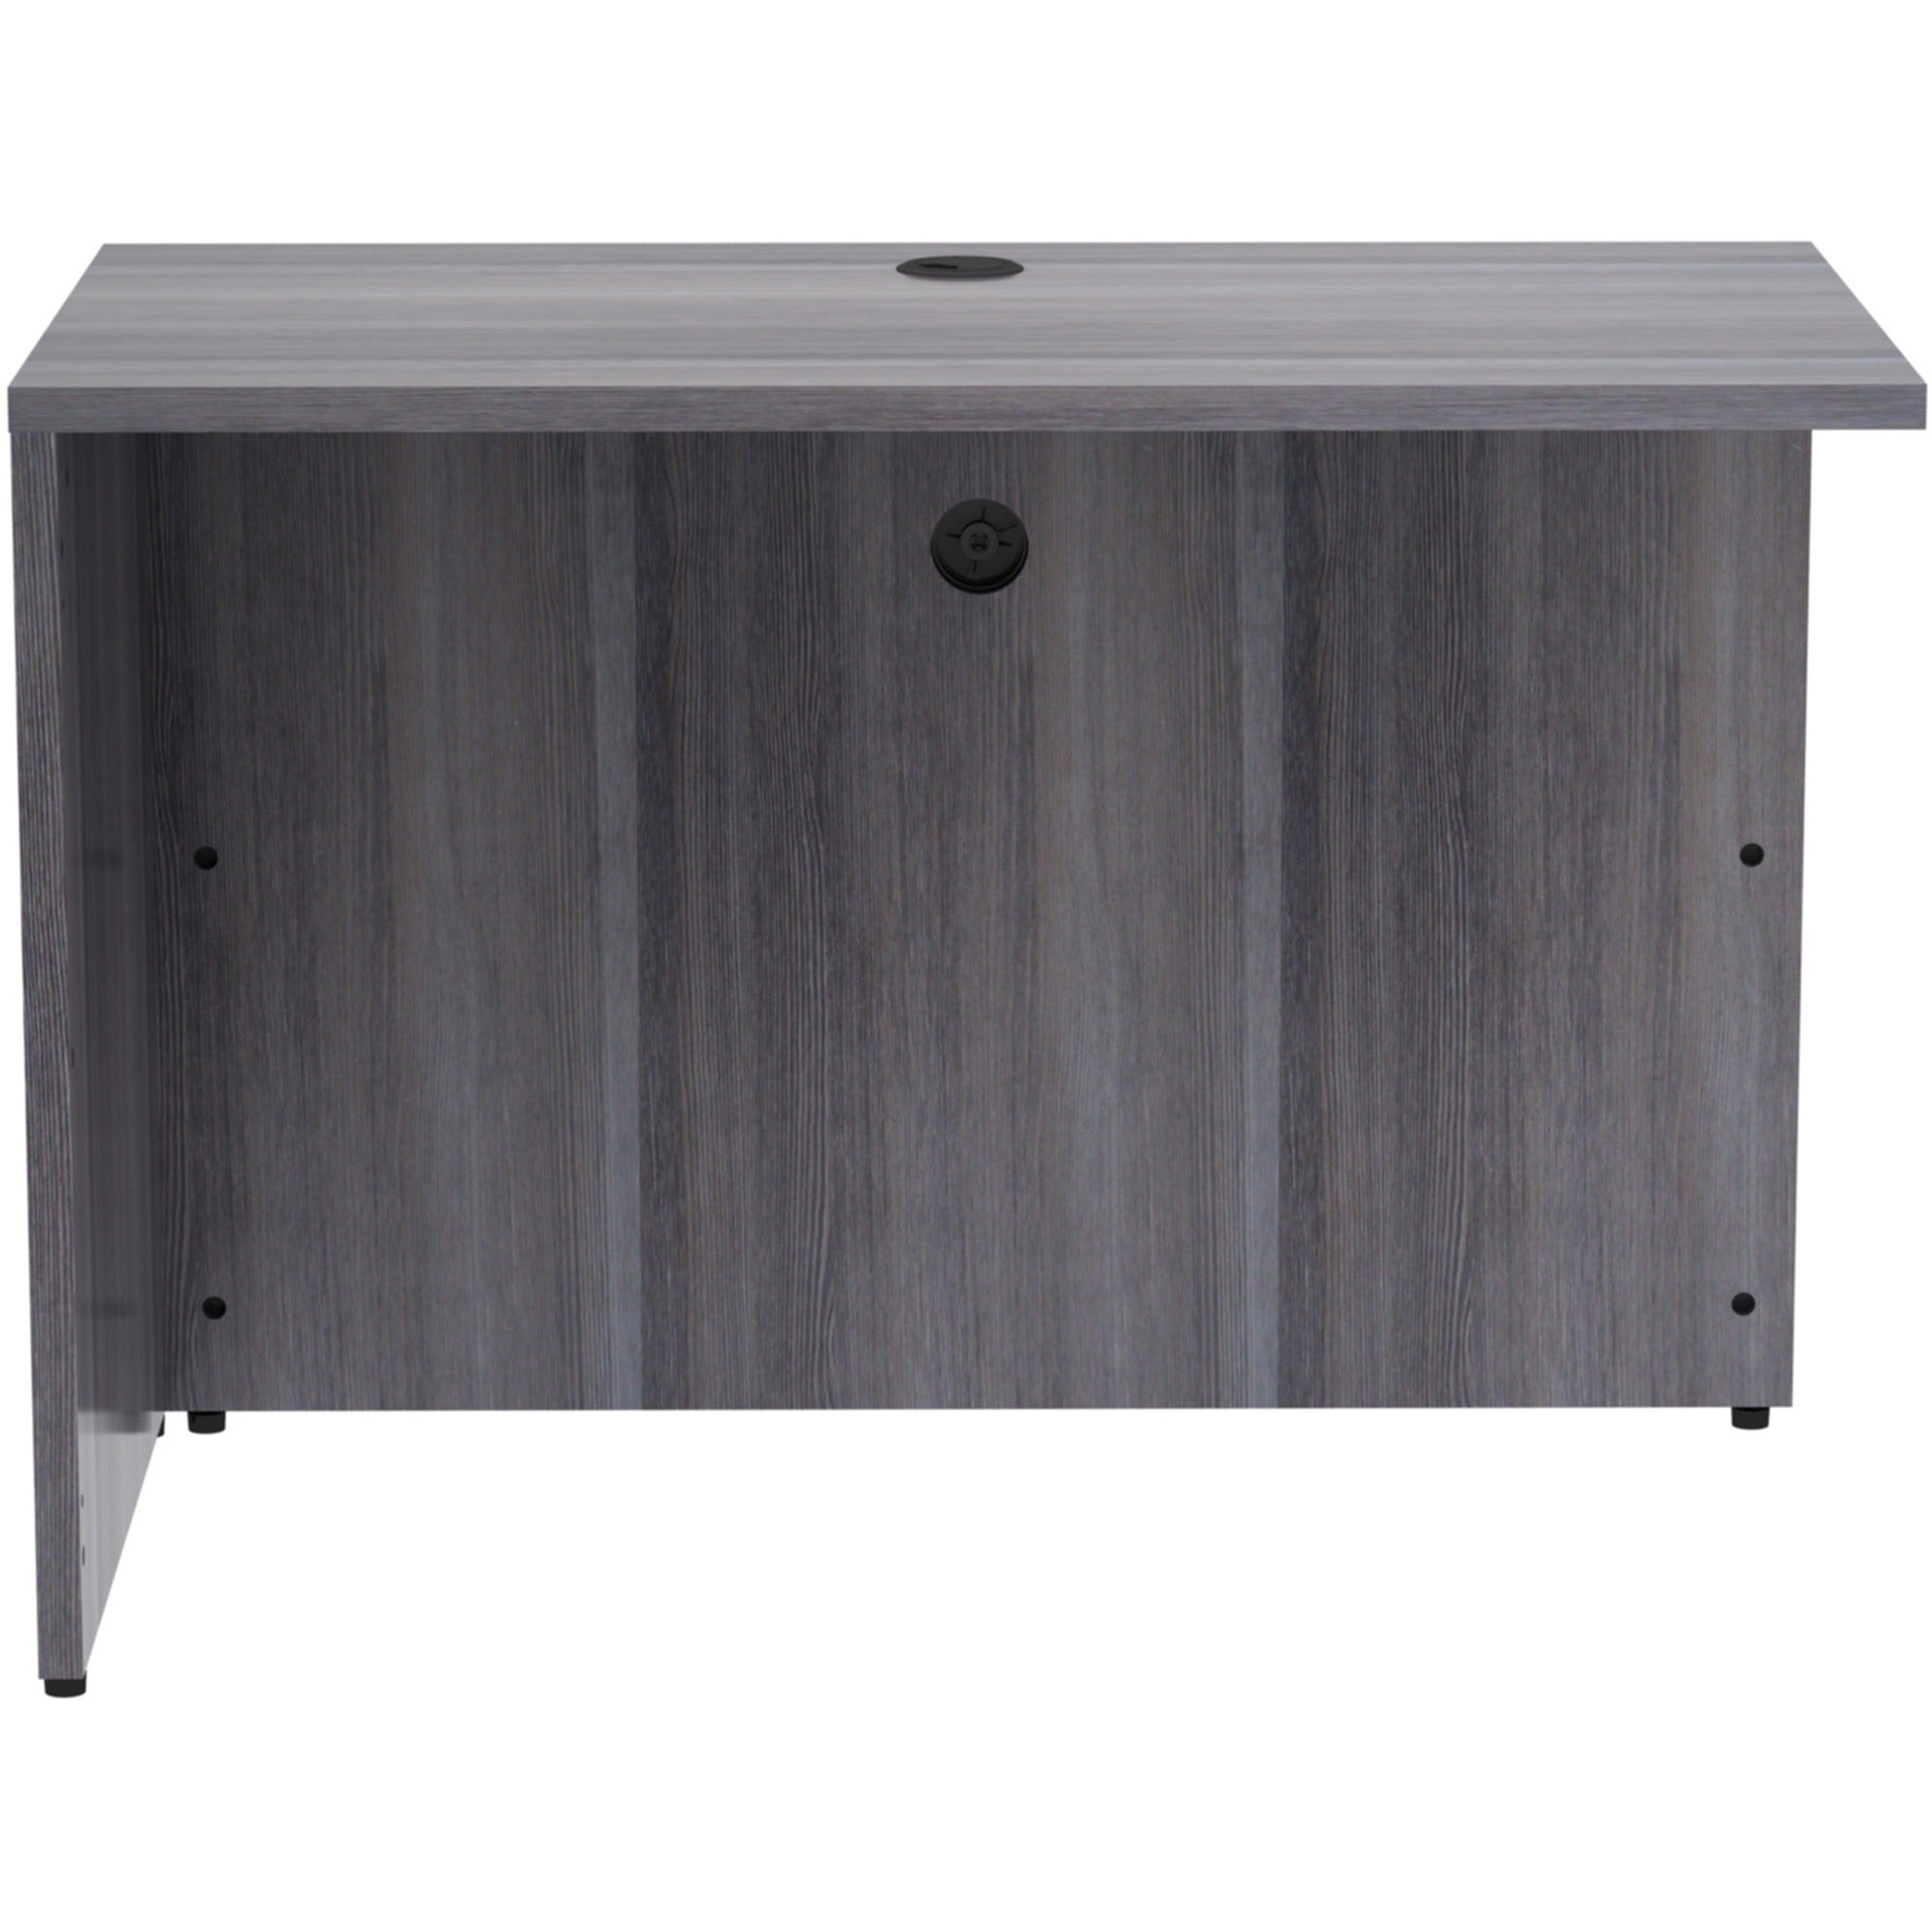 lorell-essentials-series-return-shell-42-x-24295--1-top-laminate-weathered-charcoal-table-top-modesty-panel_llr69555 - 3